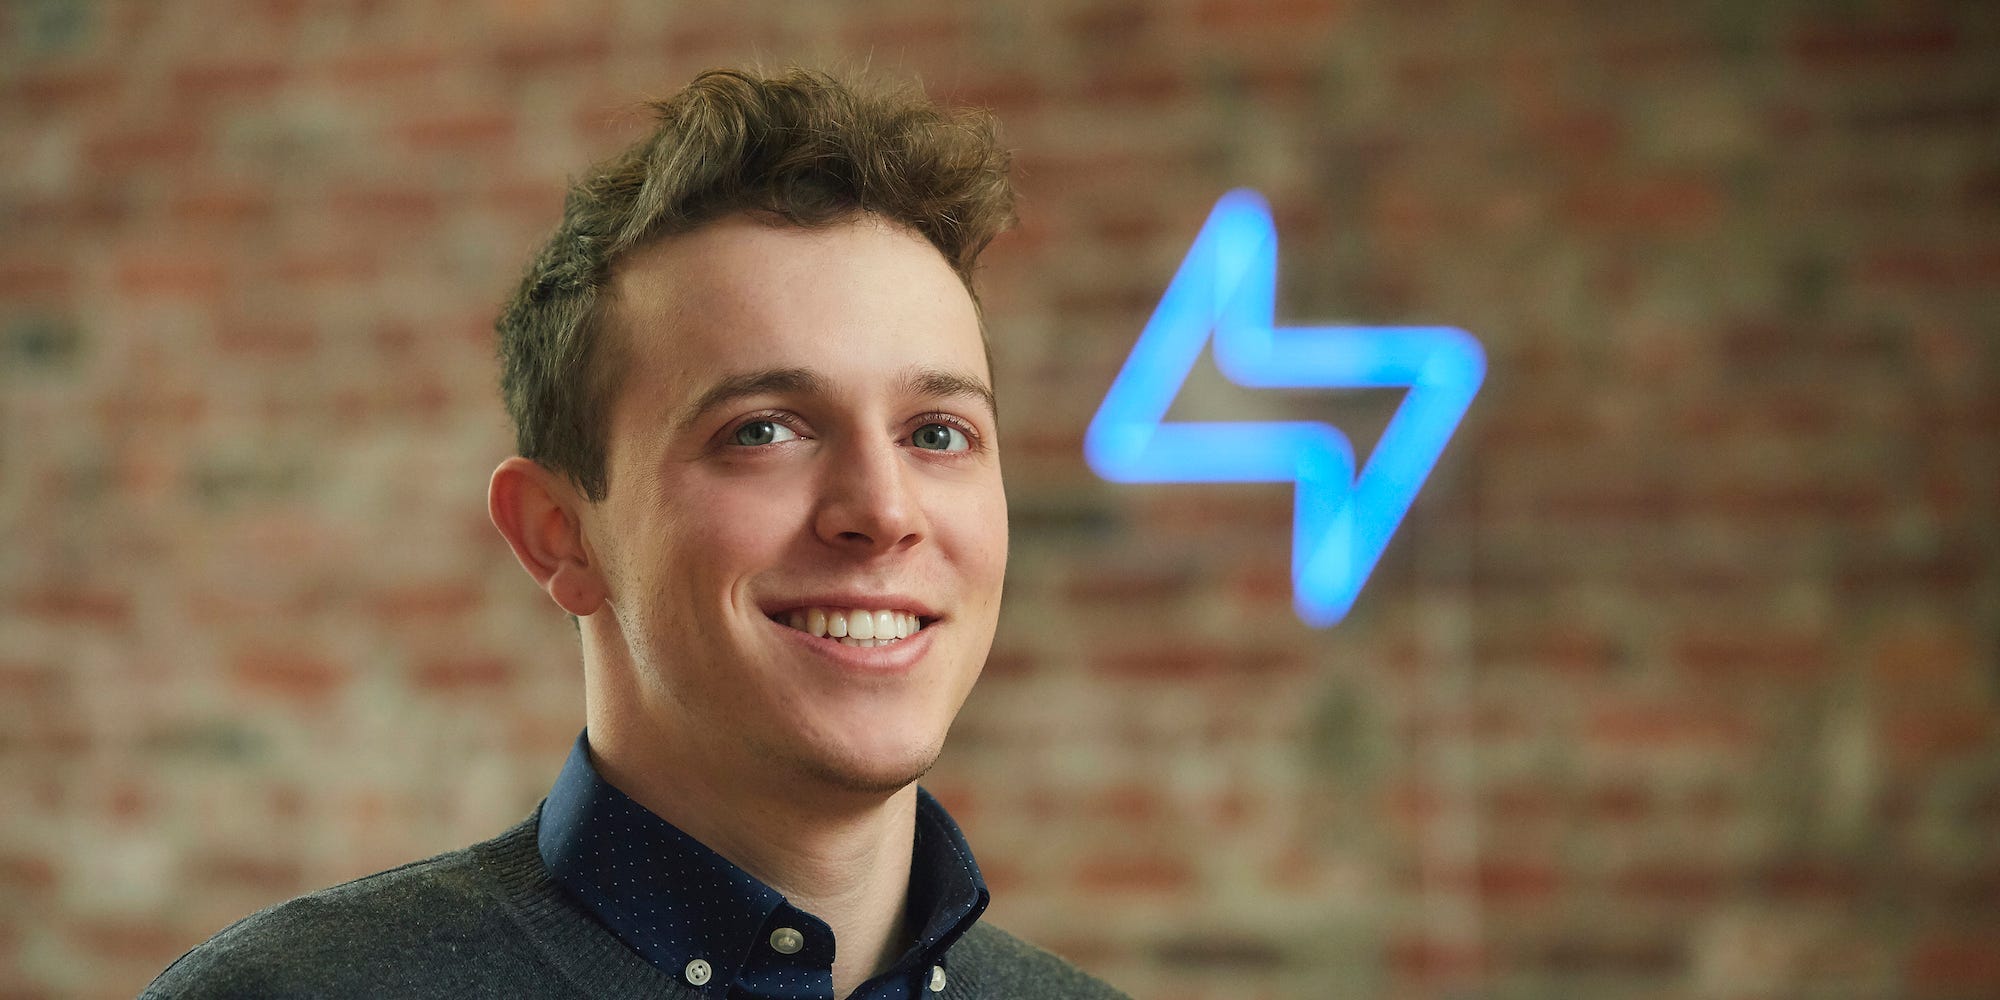 Ryan Breslow is CEO and founder of Bolt